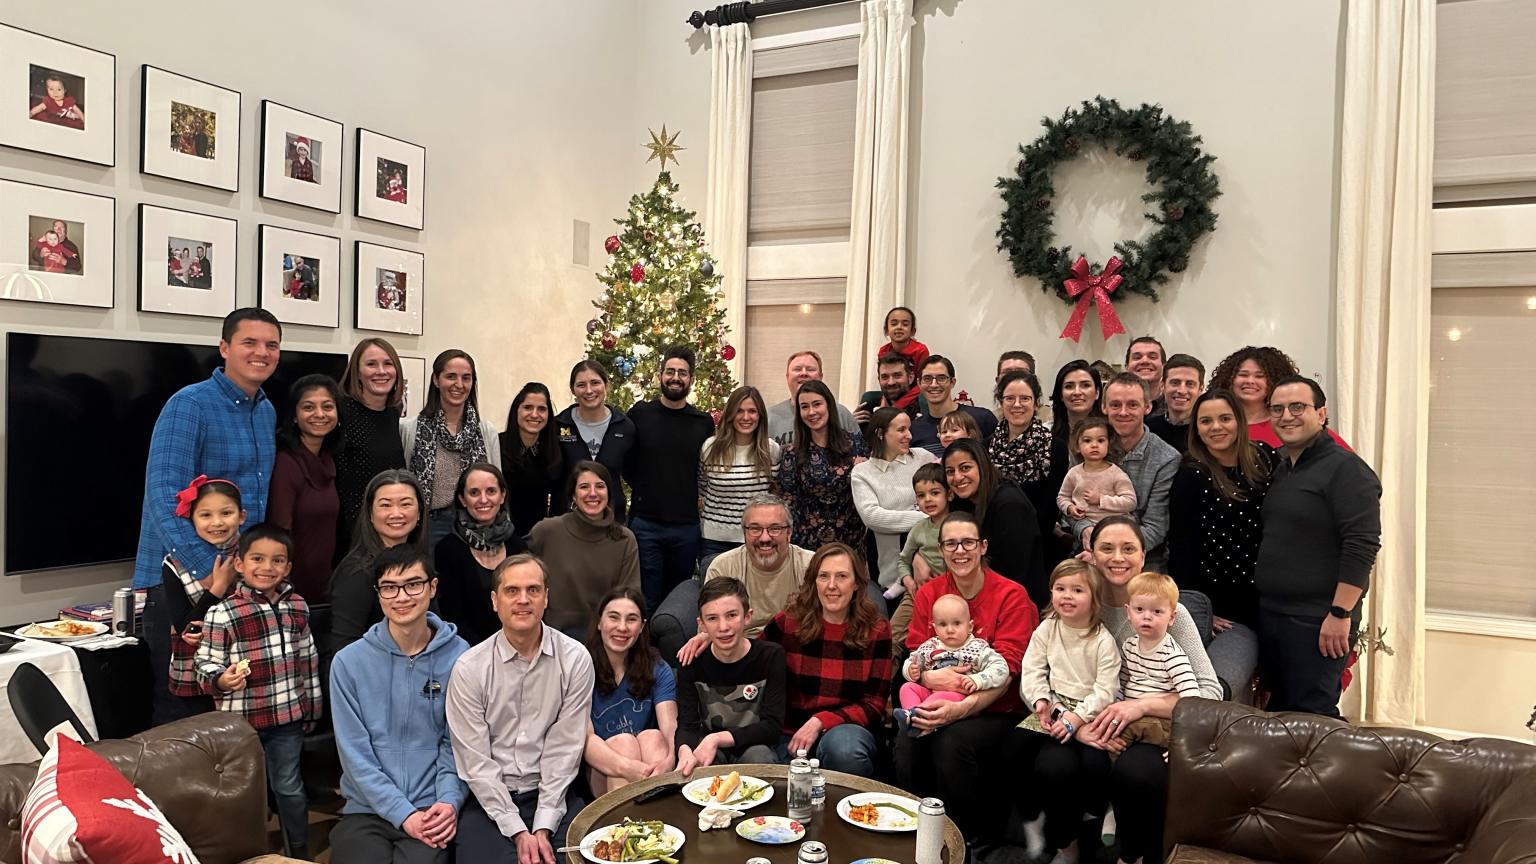 Pediatric Hospital Medicine Division Members gathered around for a holiday party.